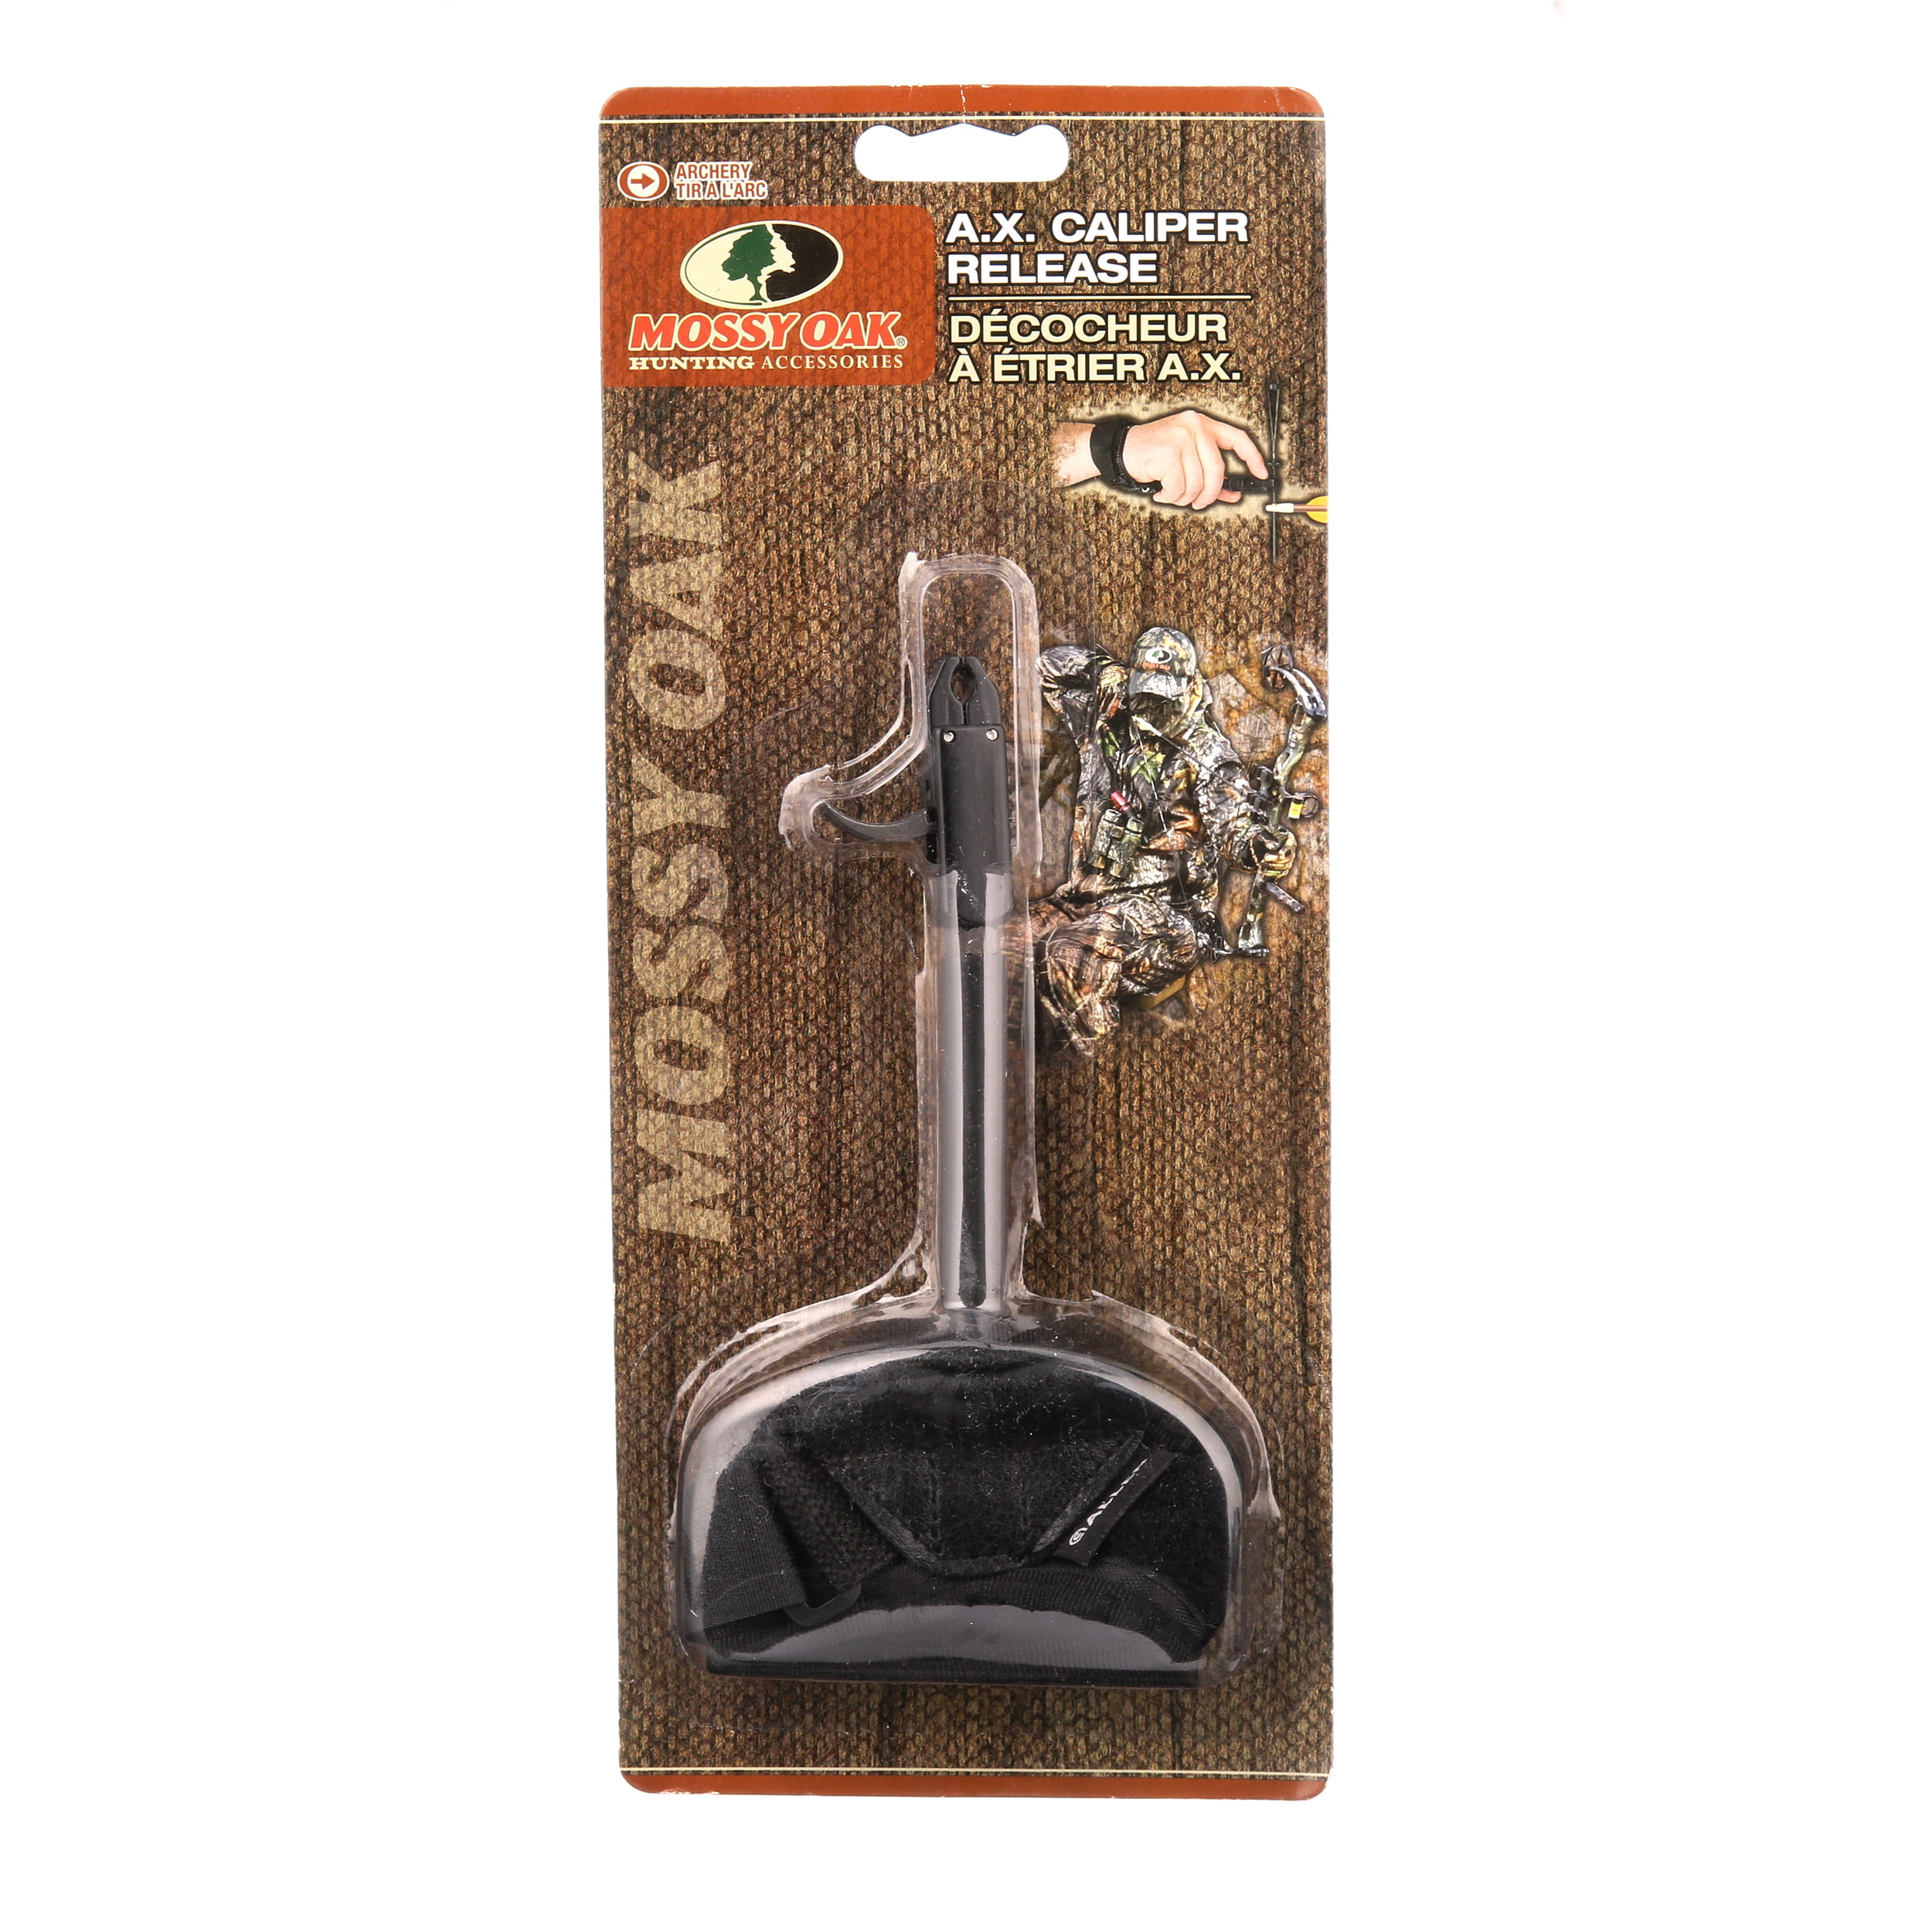 Mossy Oak AX étrier Bow String libération adulte chasse Trigger chasse Mo-axcr